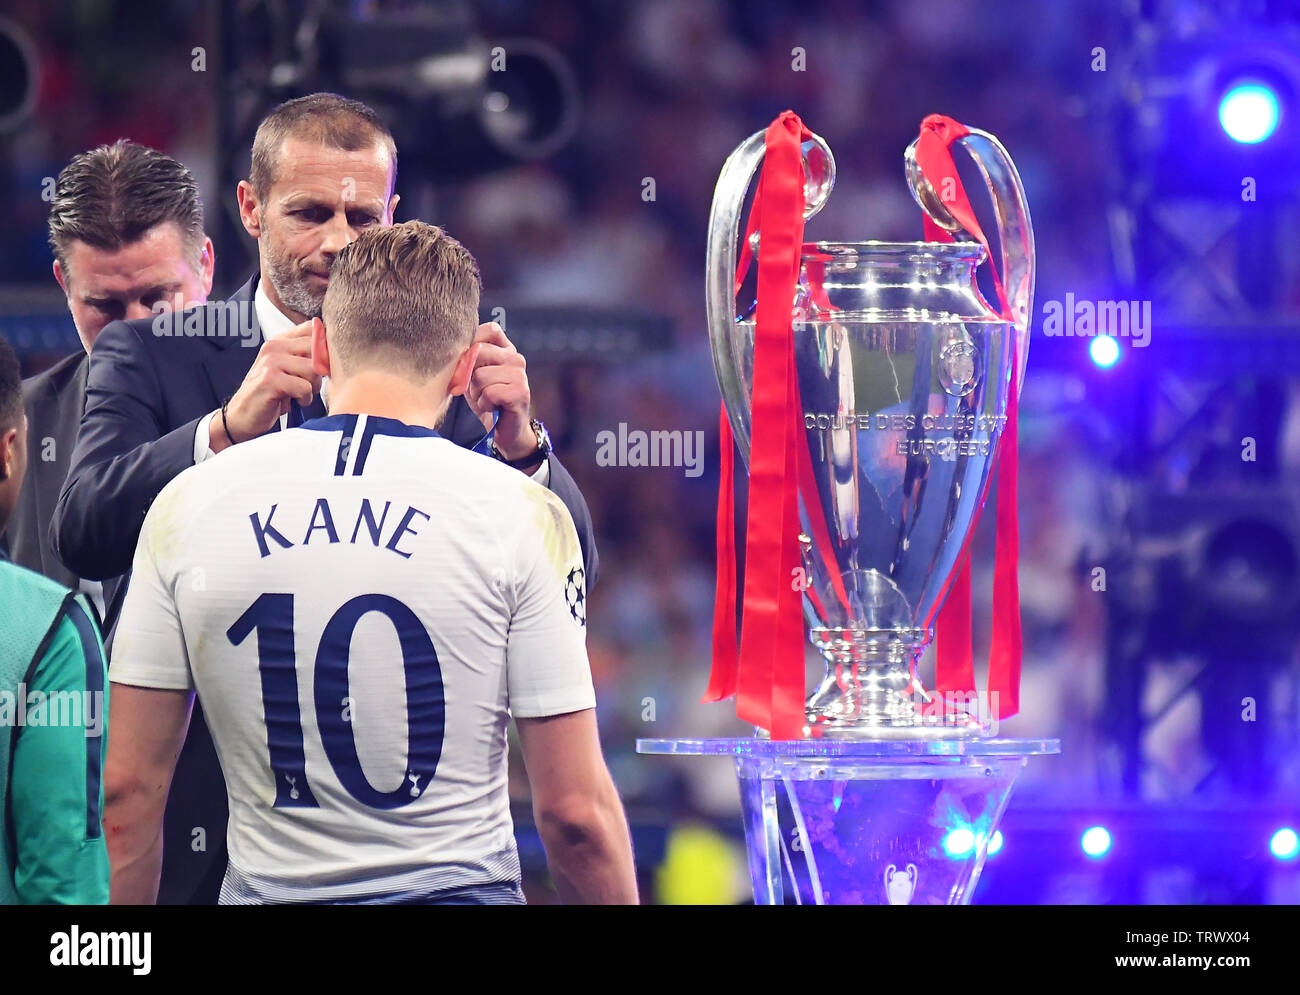 MADRID, SPAIN - JUNE 1, 2019: Aleksander Cefrin and Harry Kane of Tottenham  pictured during the award ceremony held after the 2018/19 UEFA Champions  League Final between Tottenham Hotspur (England) and Liverpool